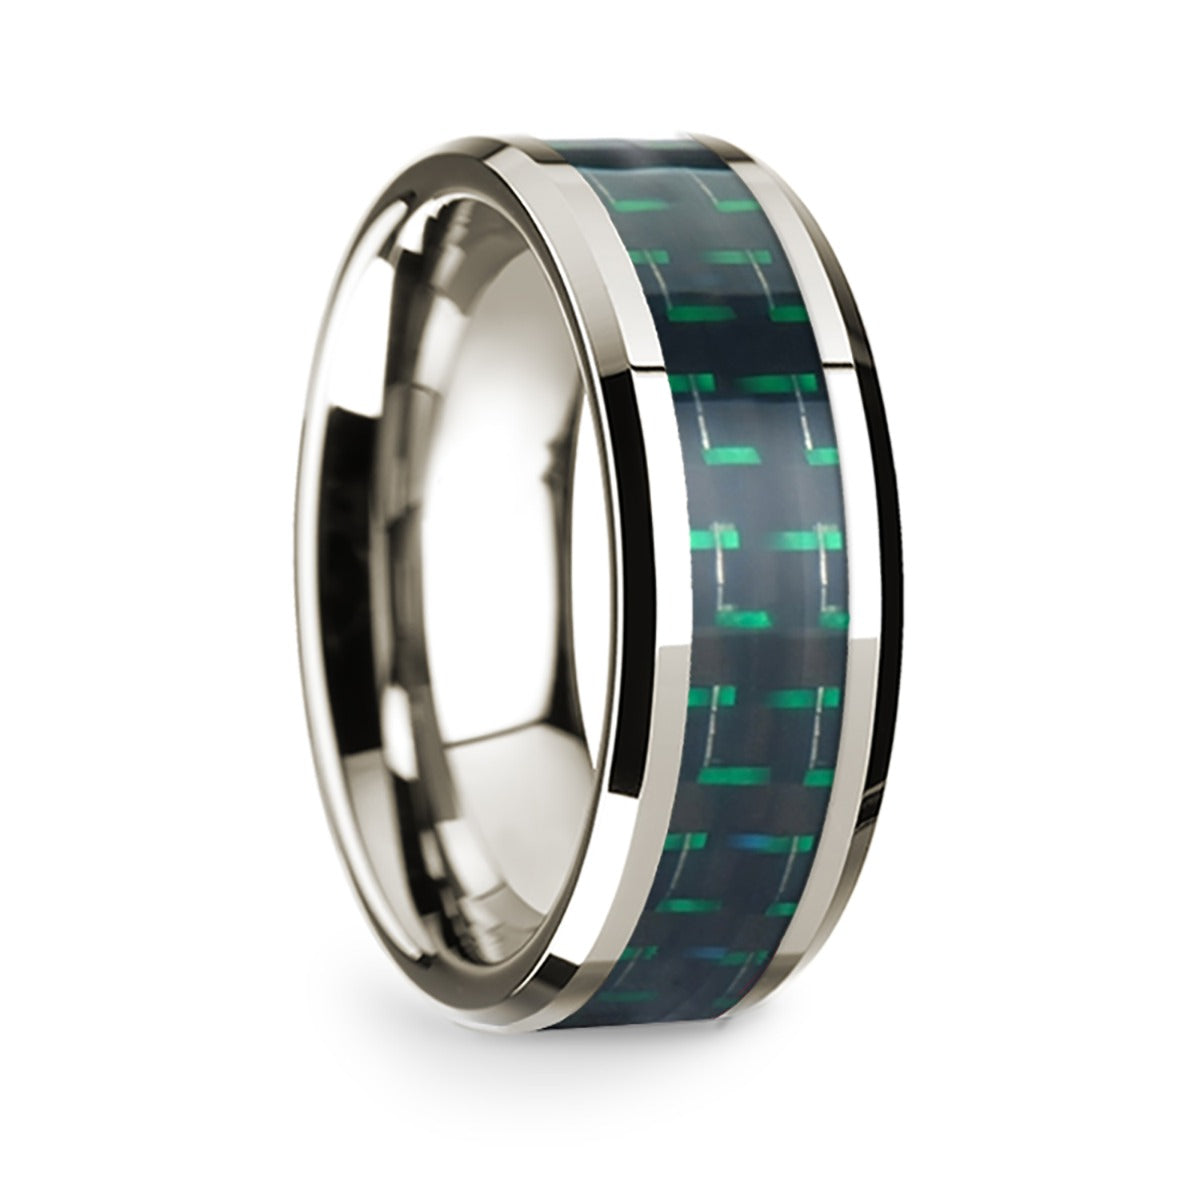 14k White Gold Men's Wedding Band with Black & Green Carbon Fiber Inlay